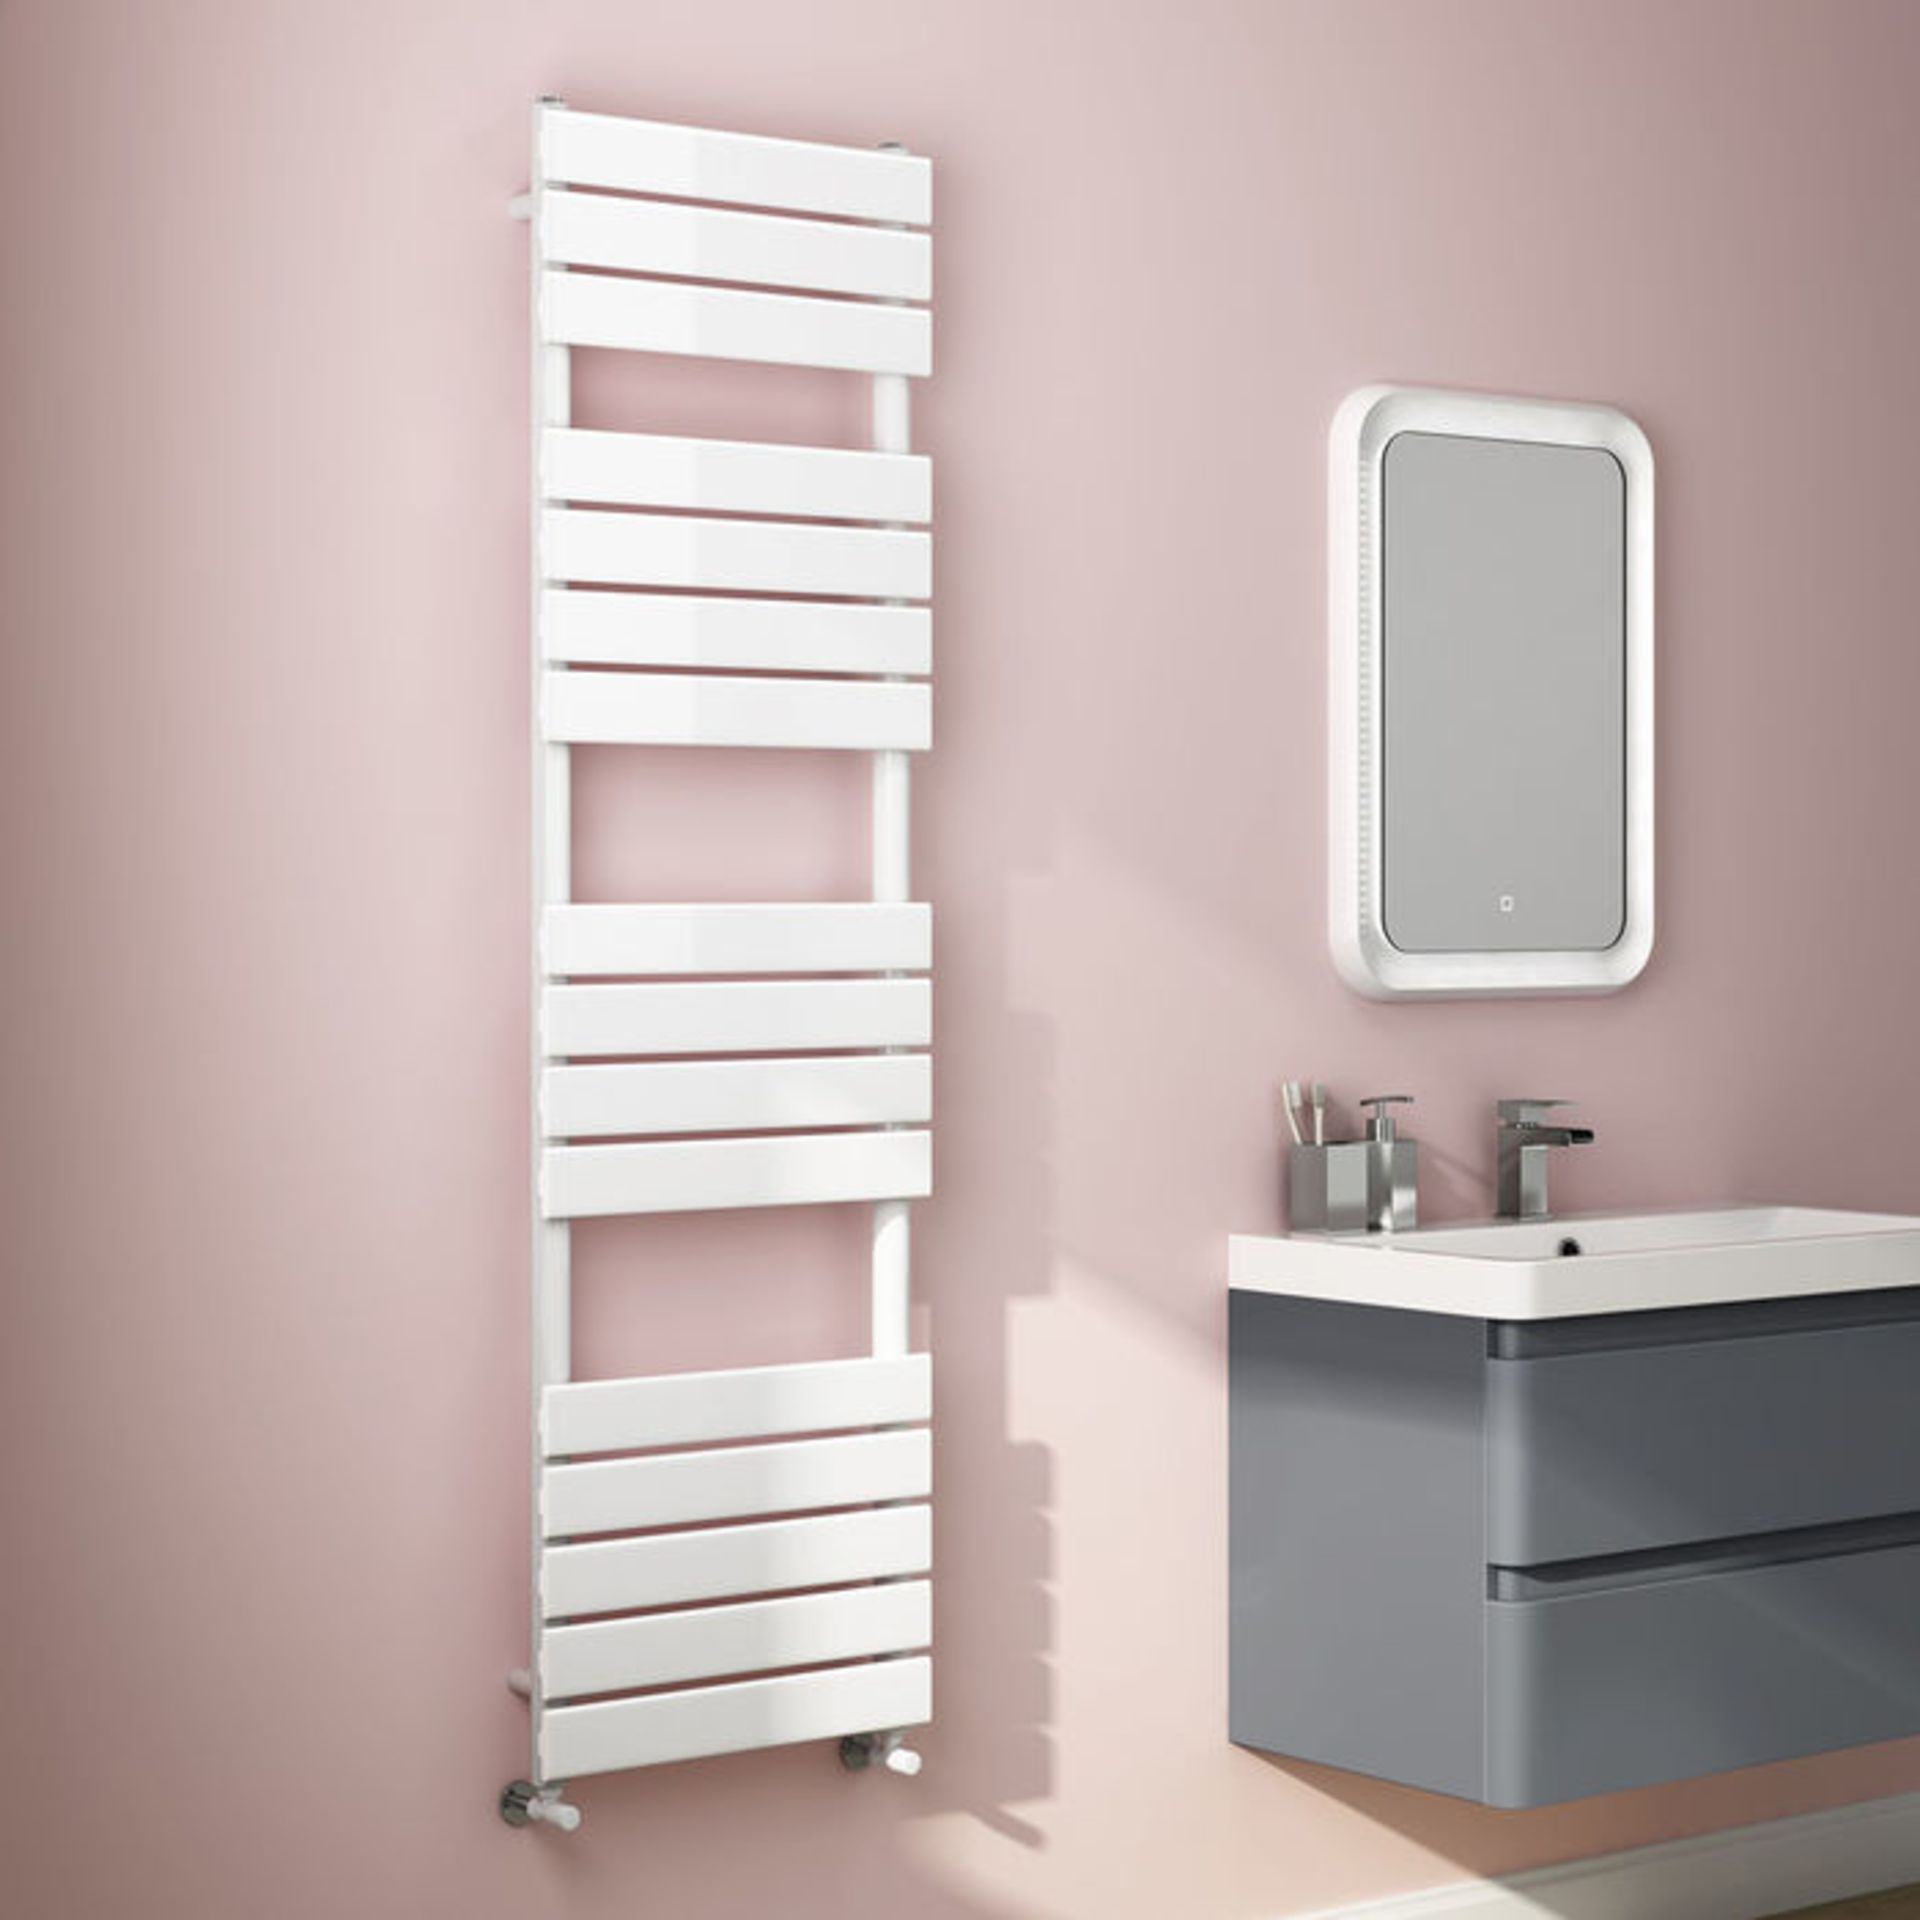 (NY136) 1600x450mm White Flat Panel Ladder Towel Radiator. RRP £219.99. Made from low carbon steel